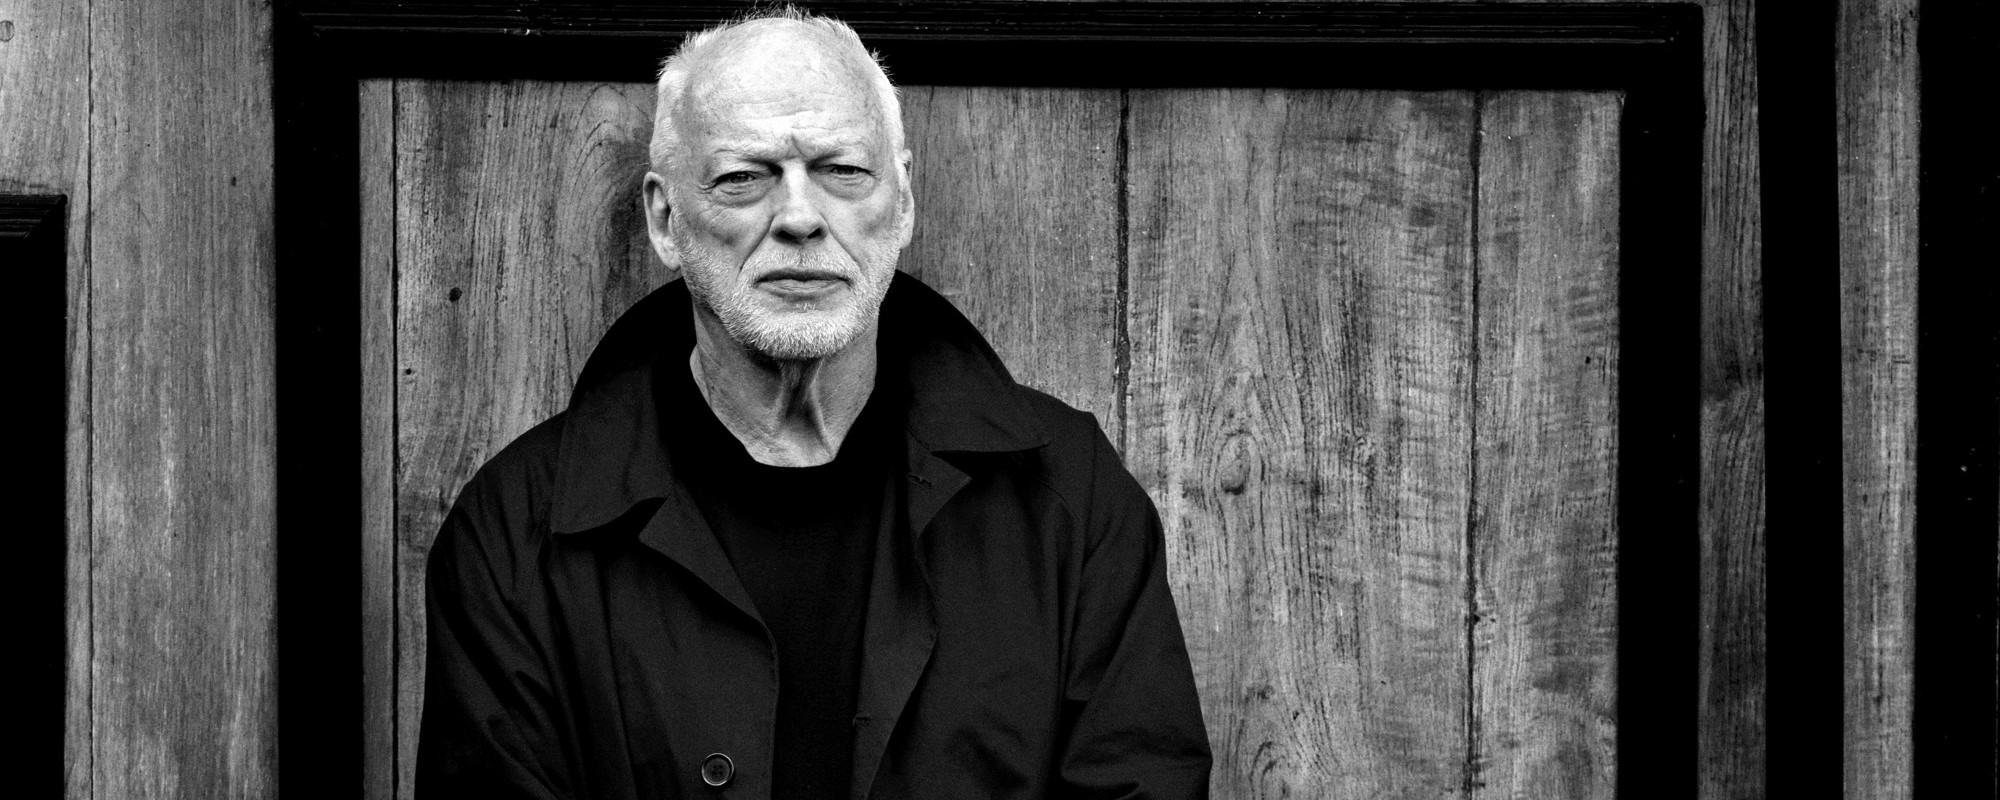 David Gilmour Reveals Plans for New Solo Tour, Admits “an Unwillingness” to Perform ’70-Era Pink Floyd Songs